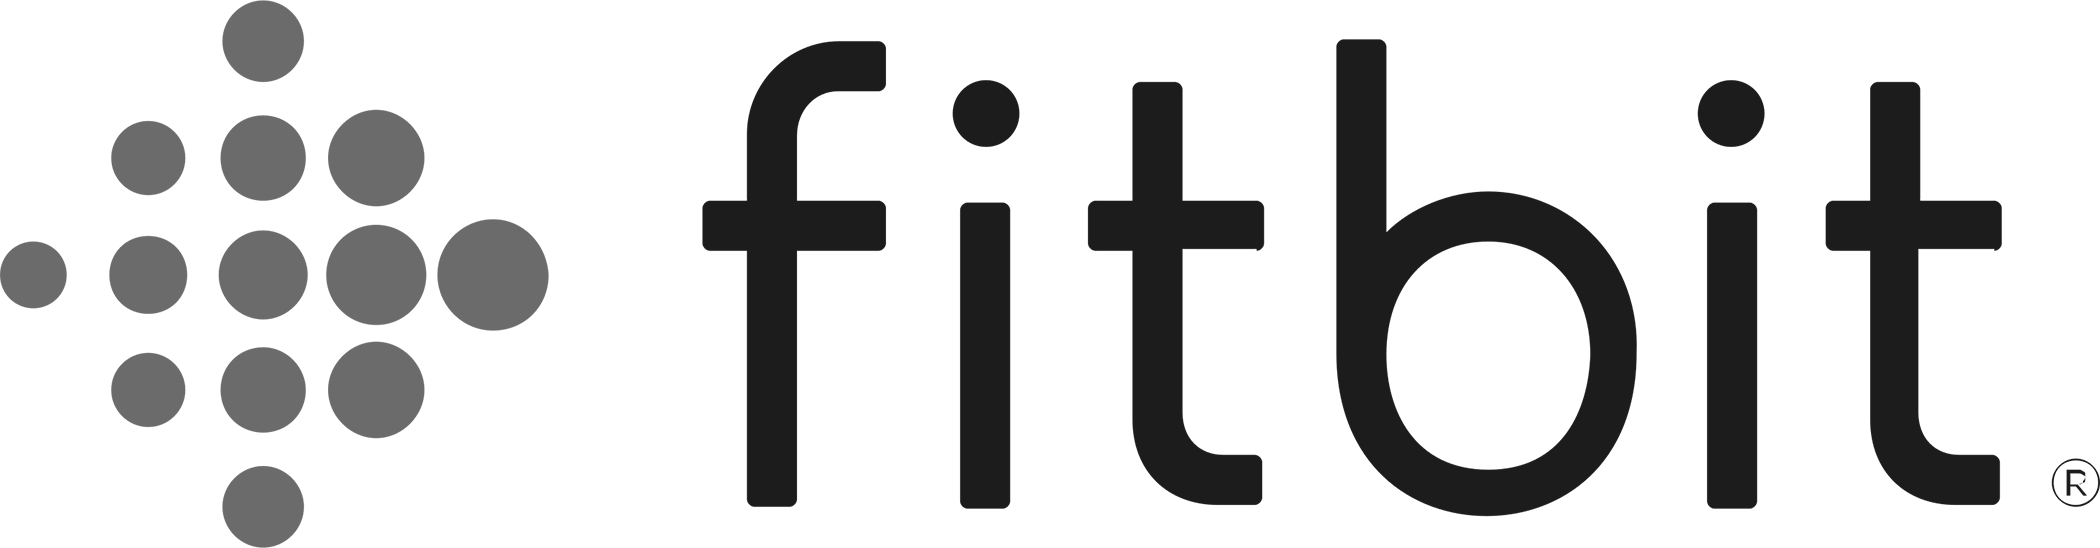 FitBit.png